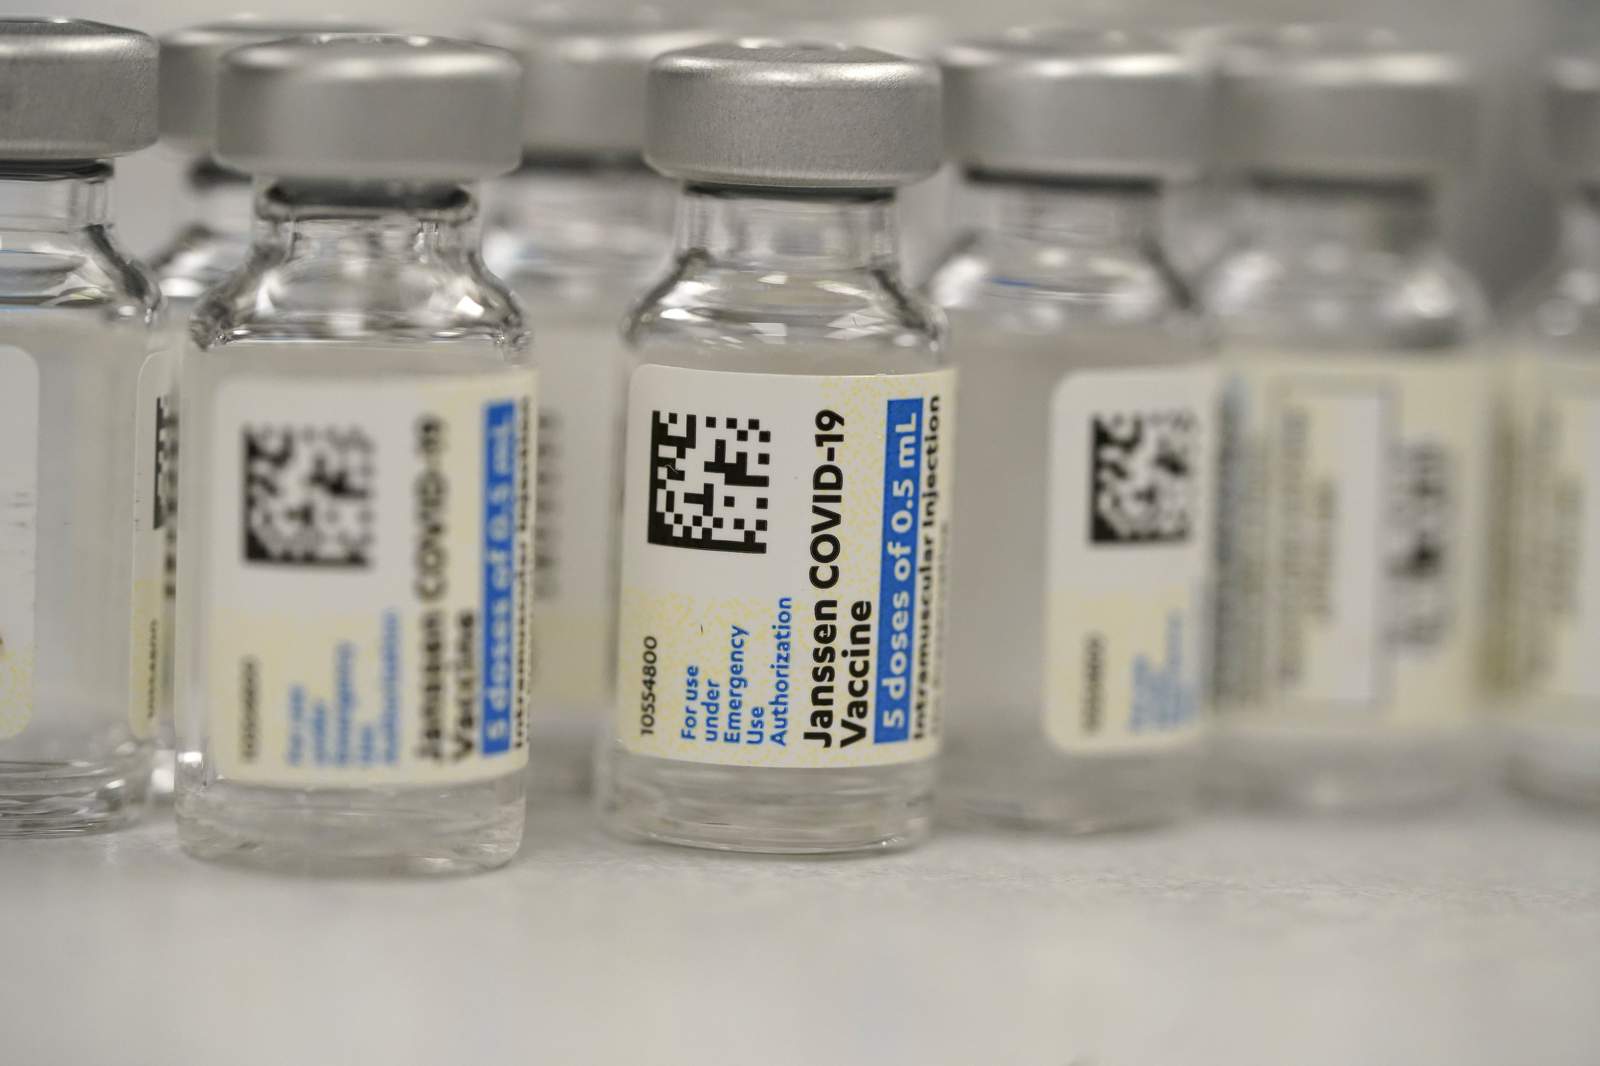 More than 800,000 first doses of COVID-19 vaccine arrive in Texas this week